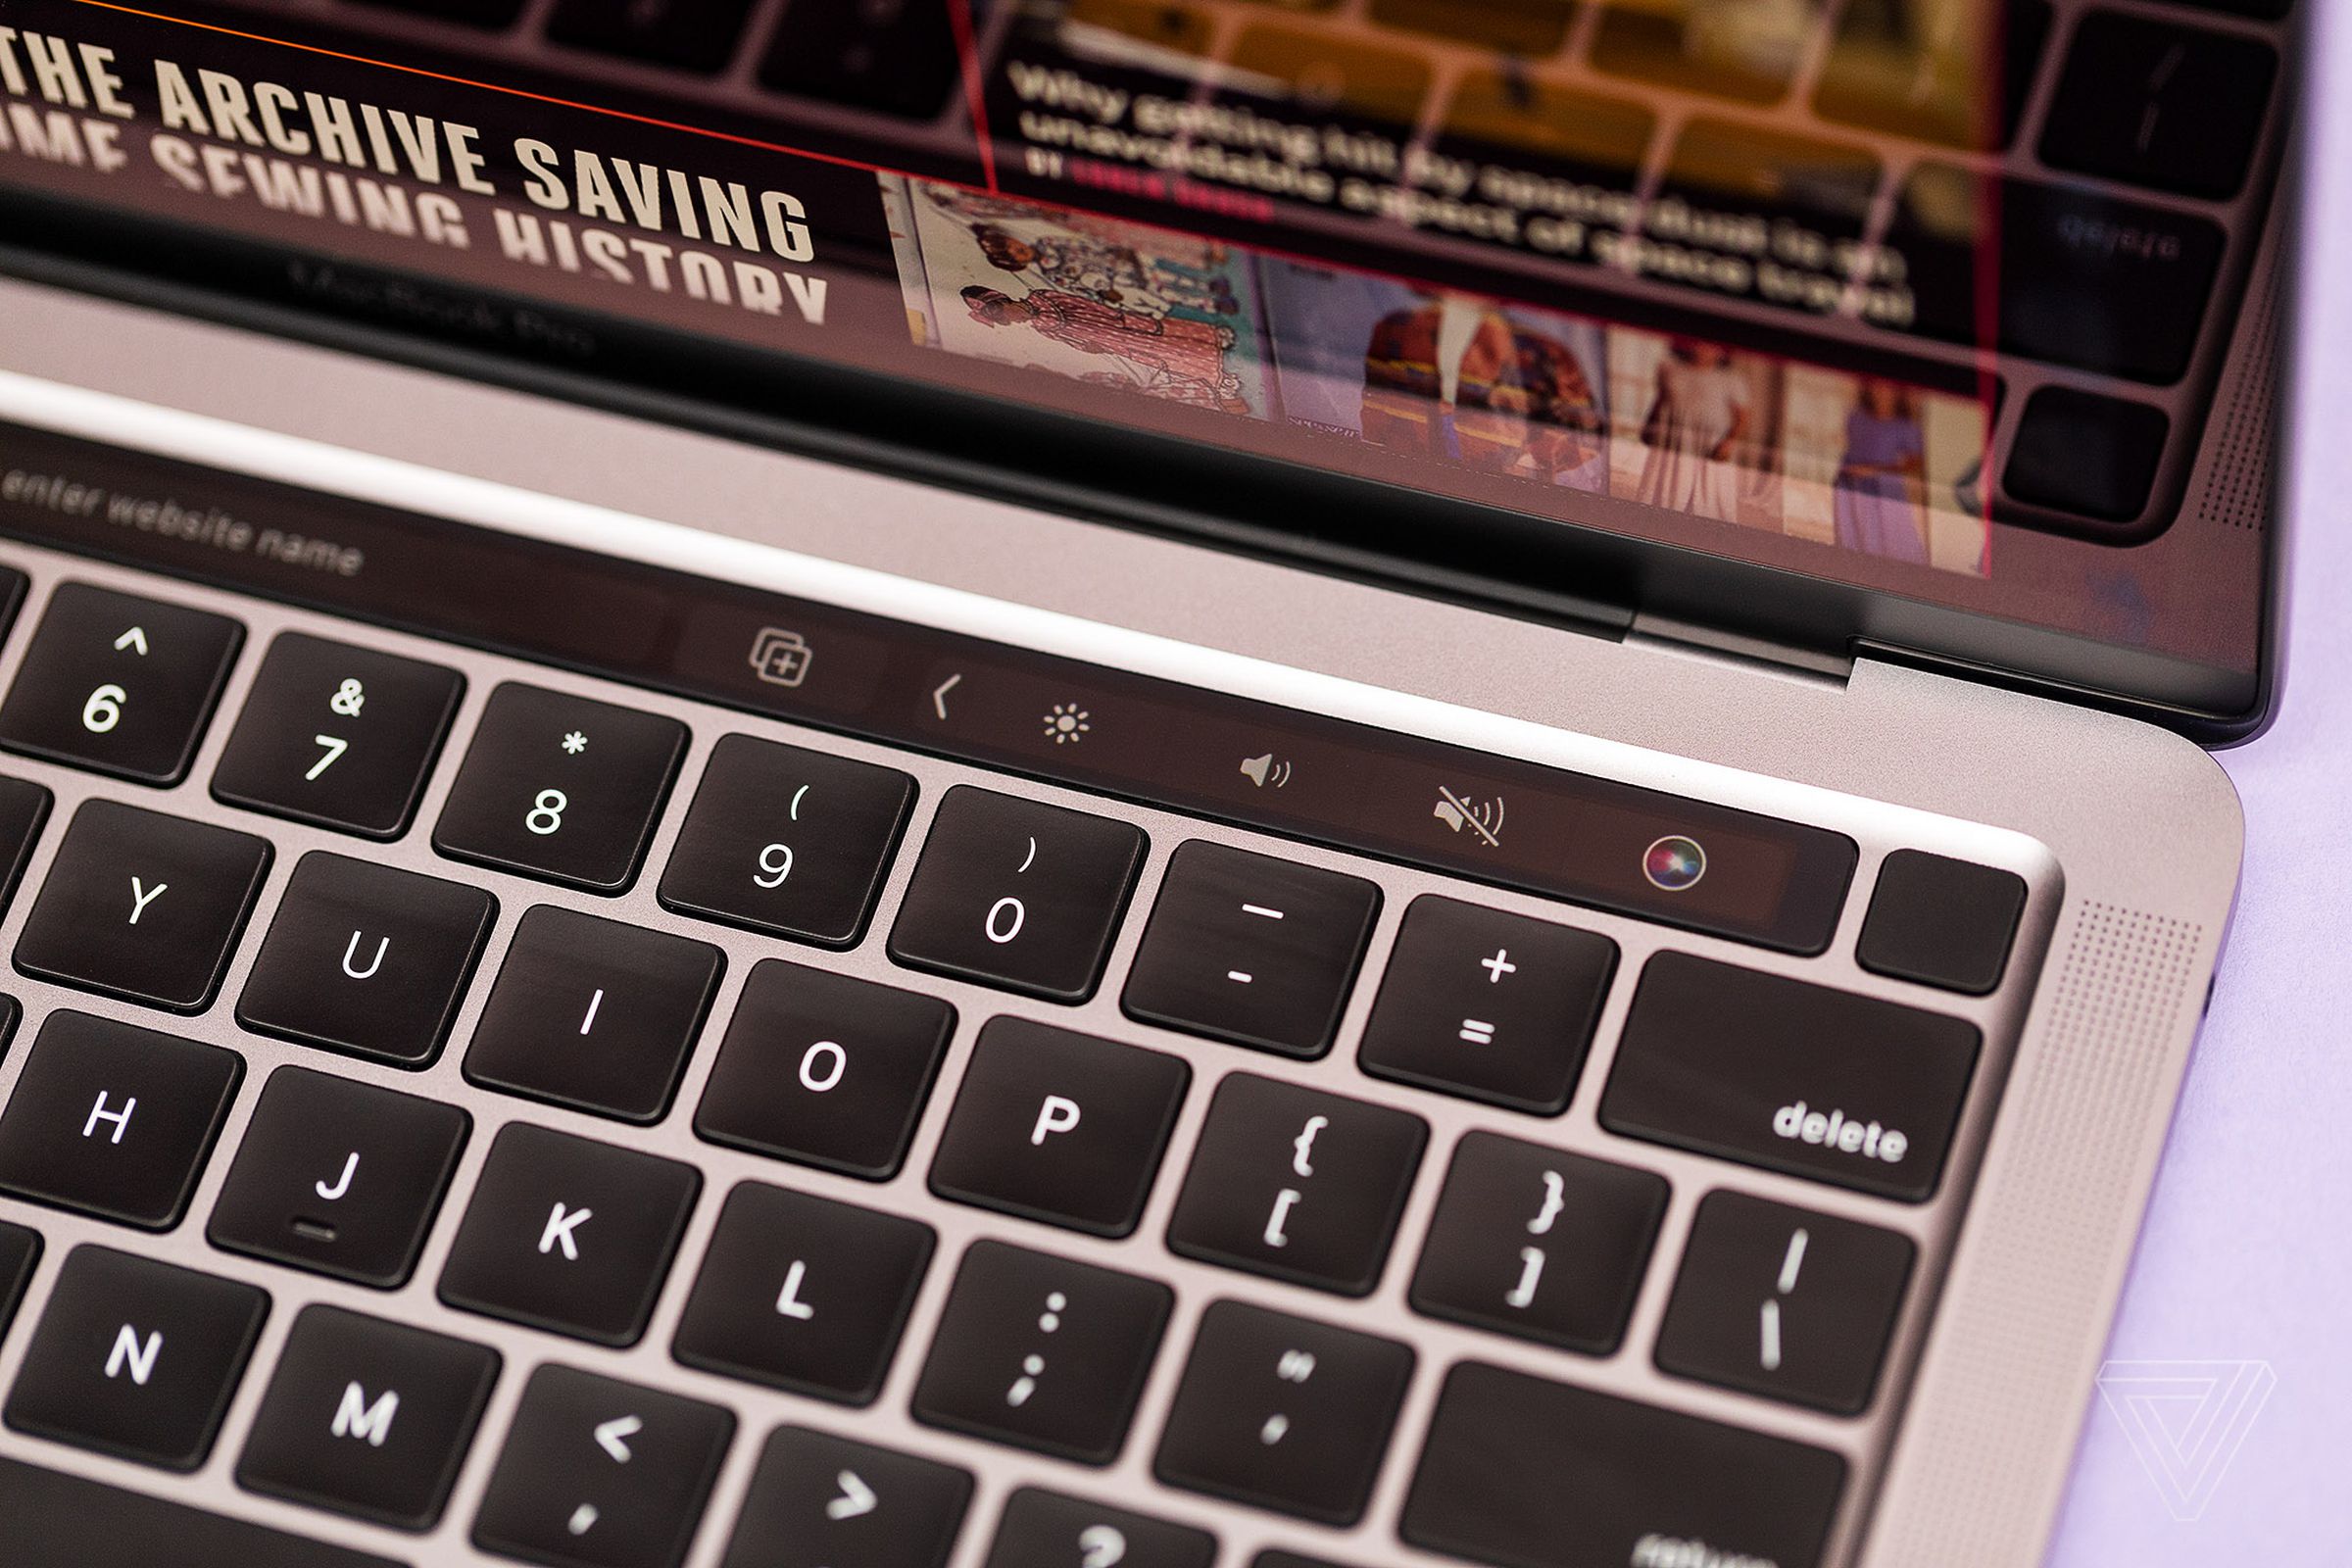 The top-right corner of the MacBook Pro keyboard deck